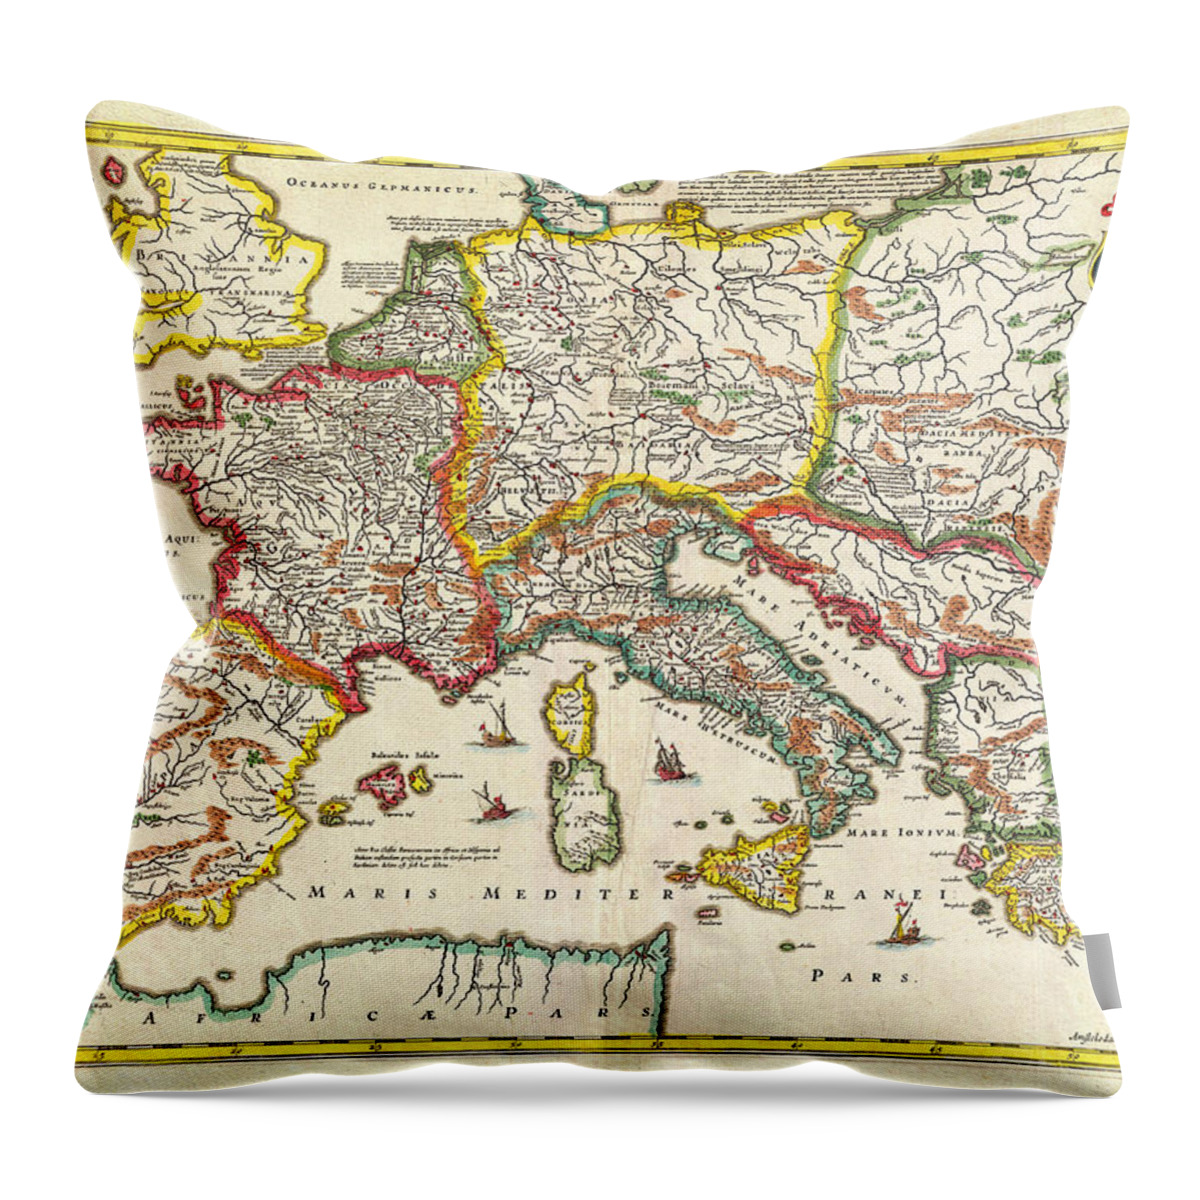 1657 Jansson Map Of The Empire Ofcharlemagne Geographicus Carolimagni Jansson 1657 Throw Pillow featuring the painting 1657 Jansson Map of the Empire ofCharlemagne Geographicus CaroliMagni jansson 1657 by MotionAge Designs